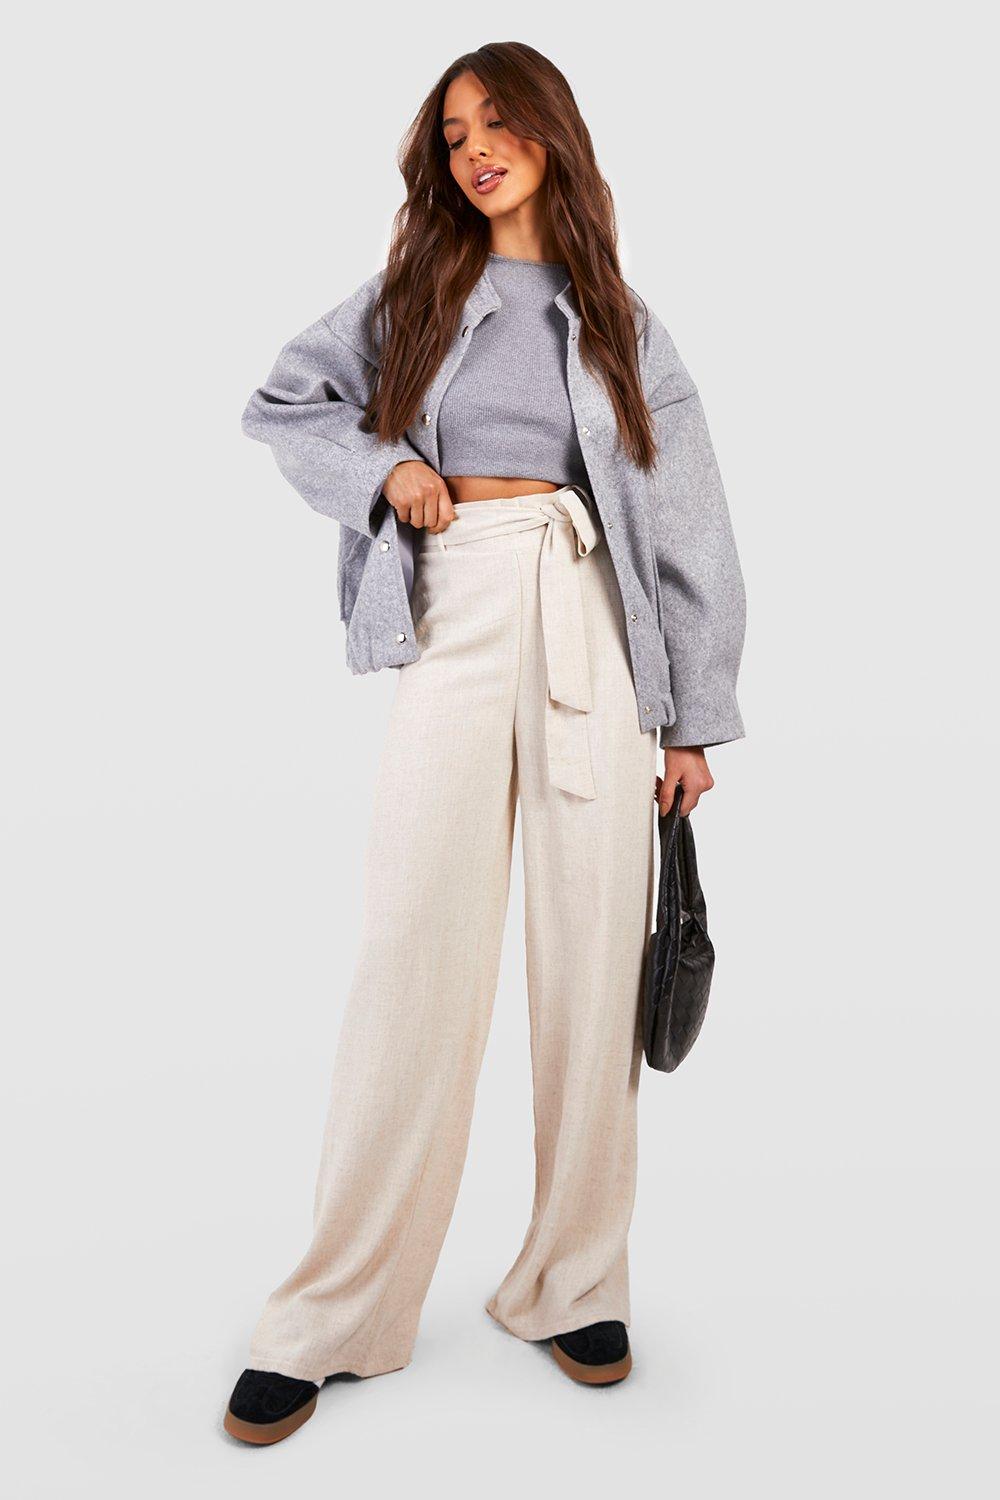 YWDJ Wide Leg Pants for Women Dressy Casual High Waist High Rise Wide Leg  Trendy Casual with Belted Long Pant Solid Color High-waist Loose Pants for